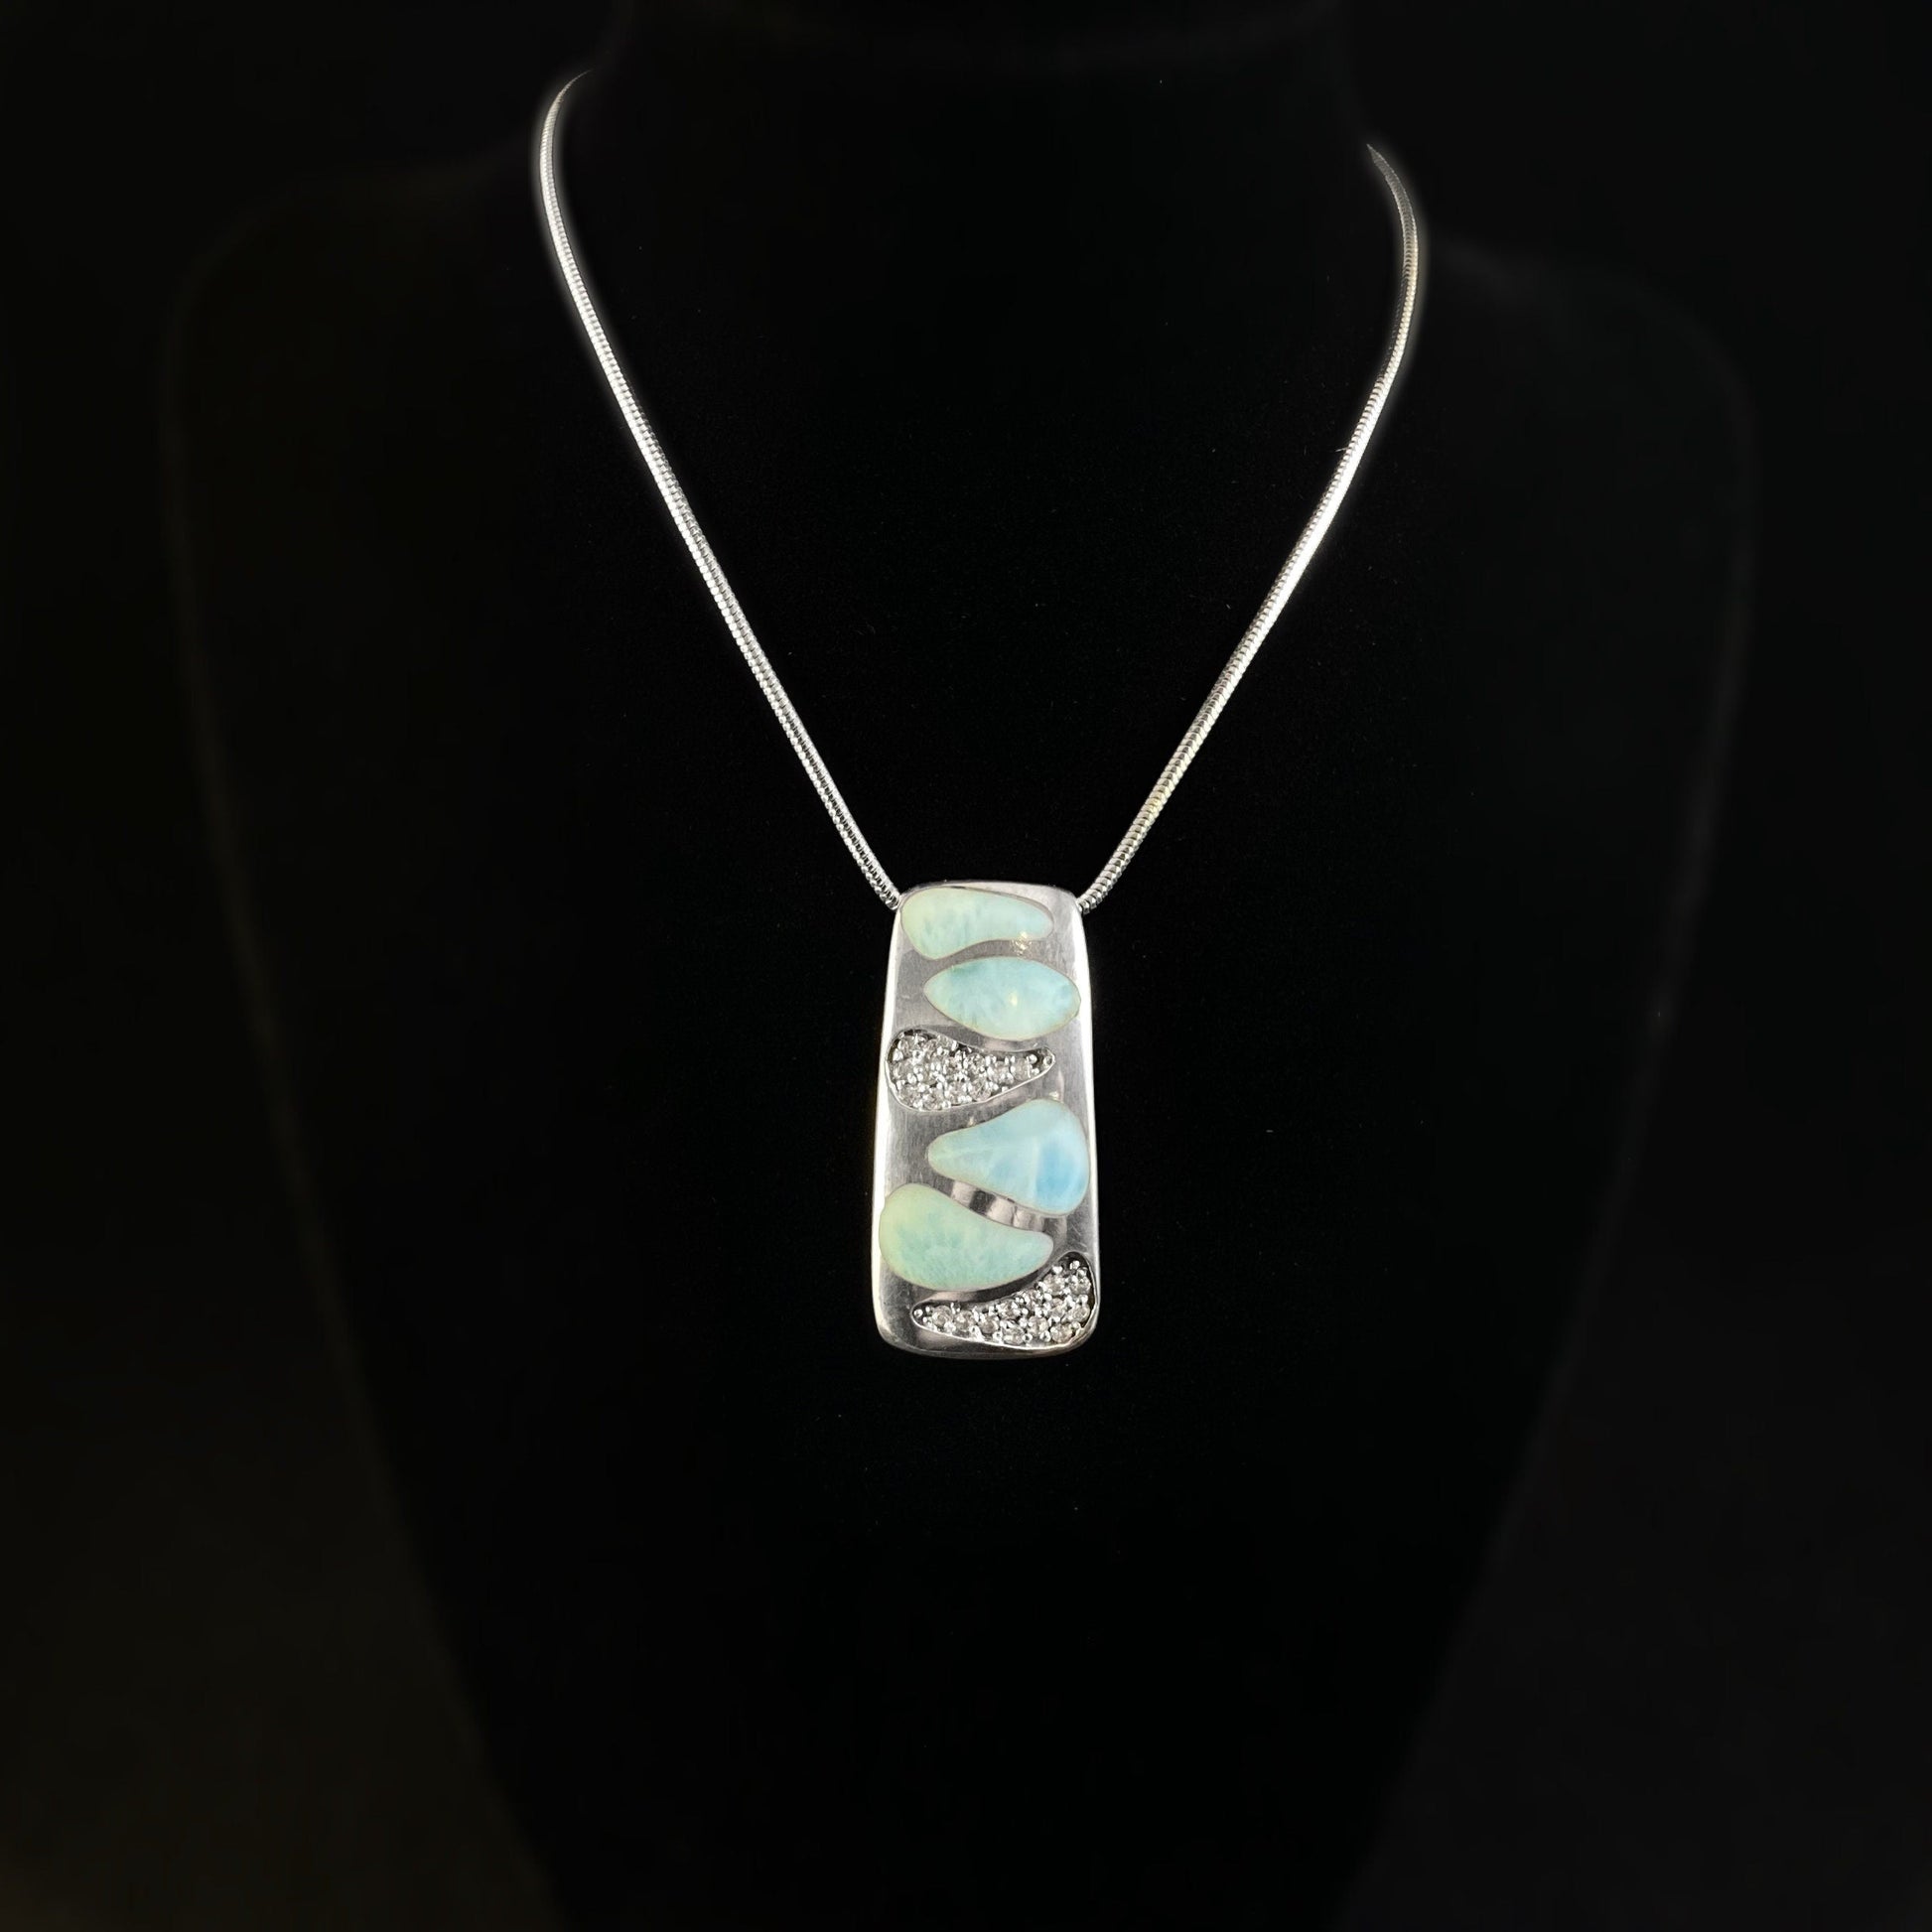 Marahlago Larimar and Sterling Silver Surf Necklace